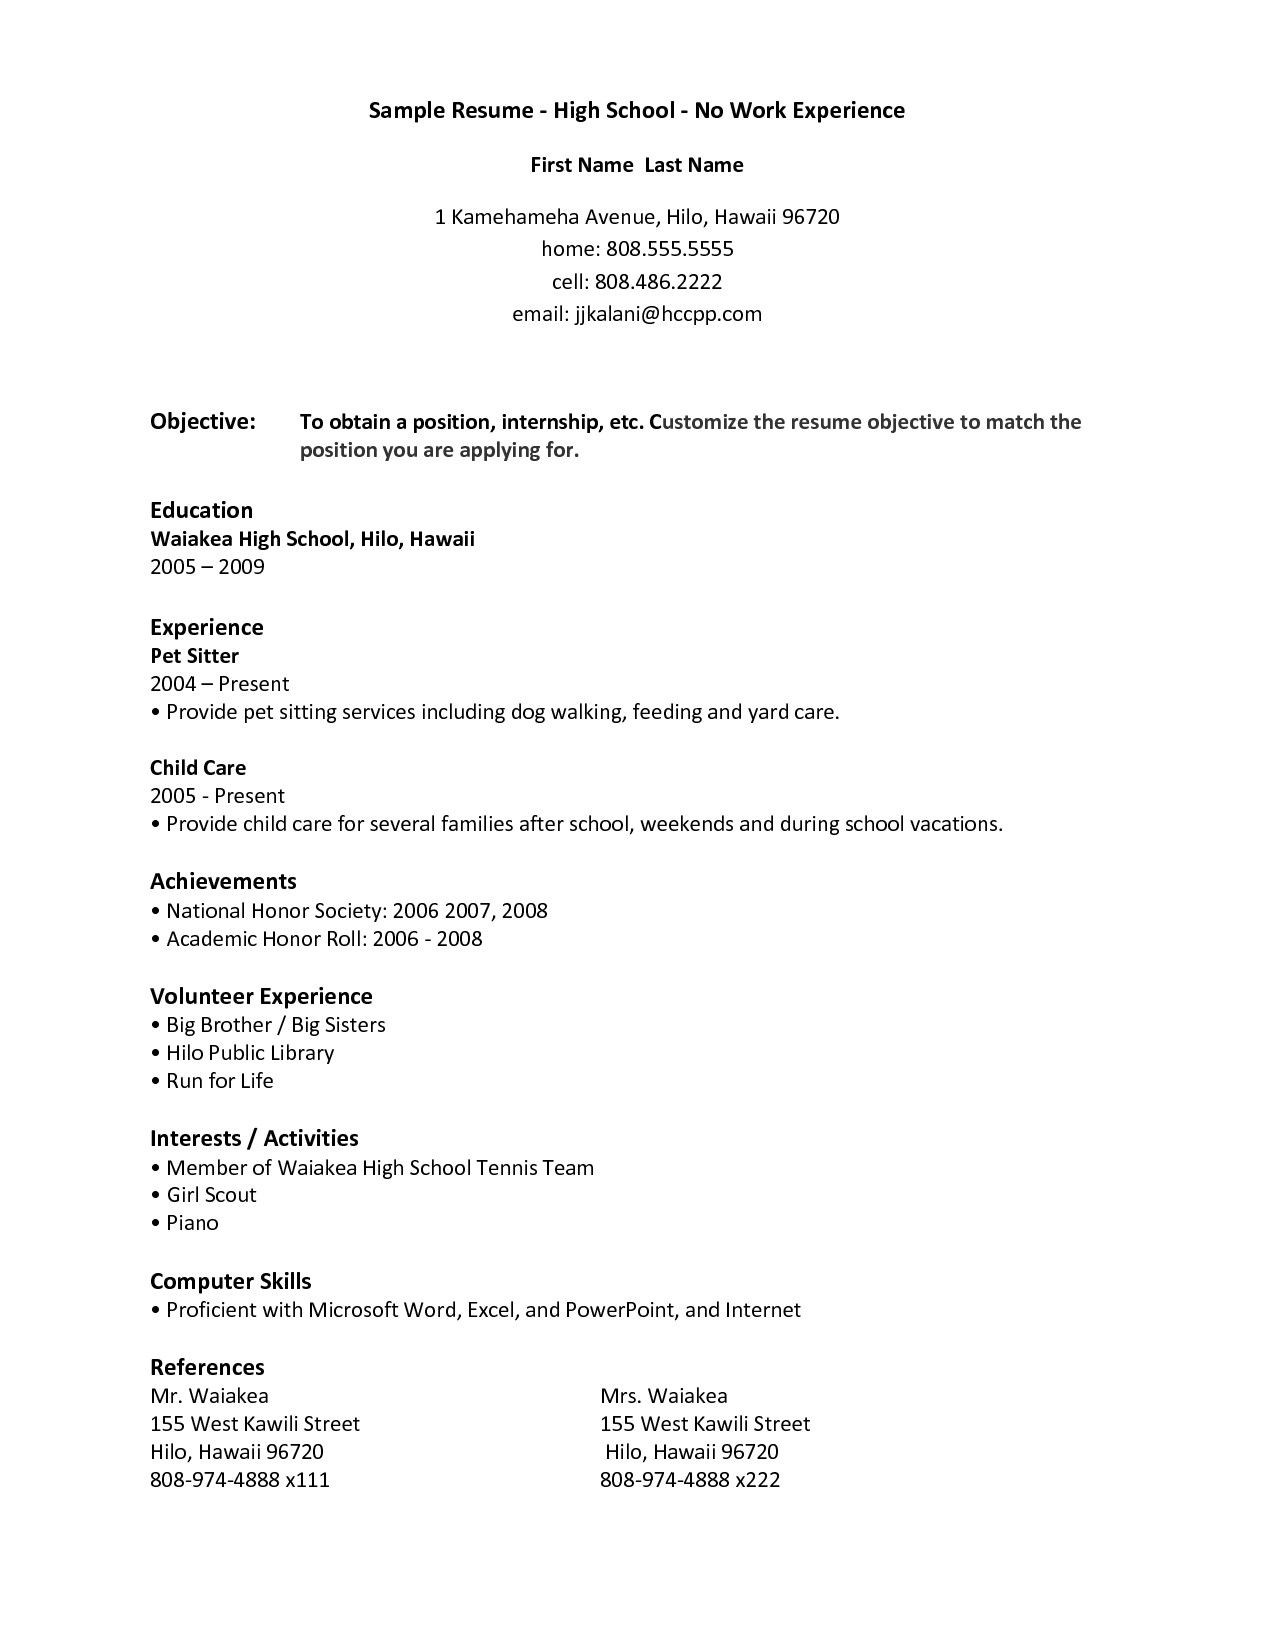 Sample Resume High School Student No Job Experience Free Resume Templates No Work Experience #experience …